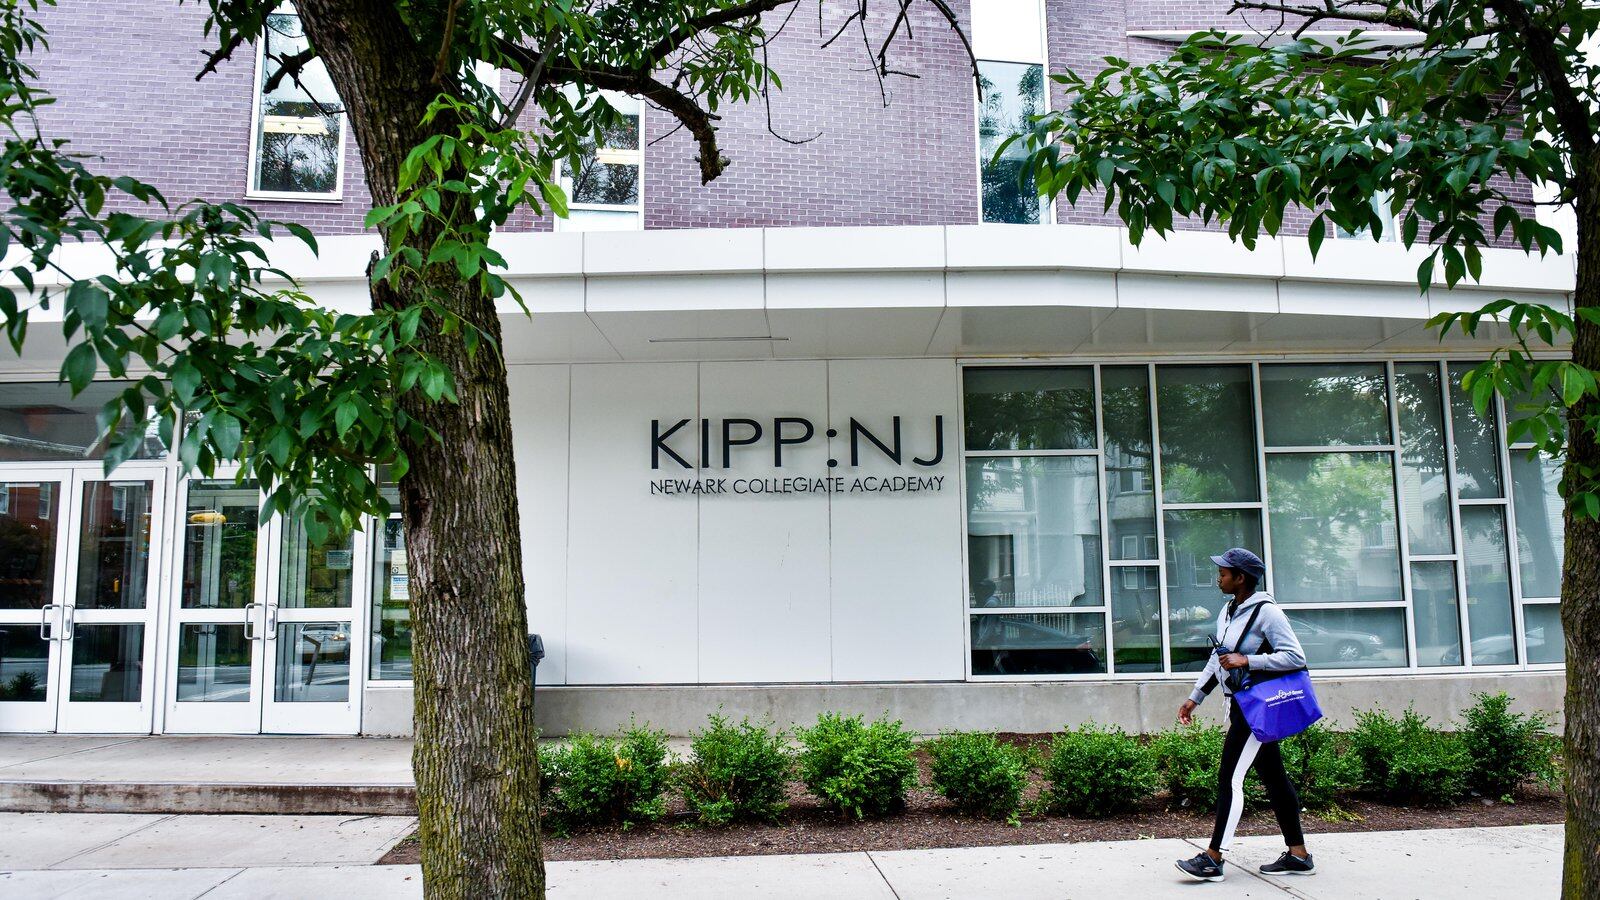 A student wearing a cap and carrying a blue tote bag walks on a walkway in front of the KIPP-NJ building.